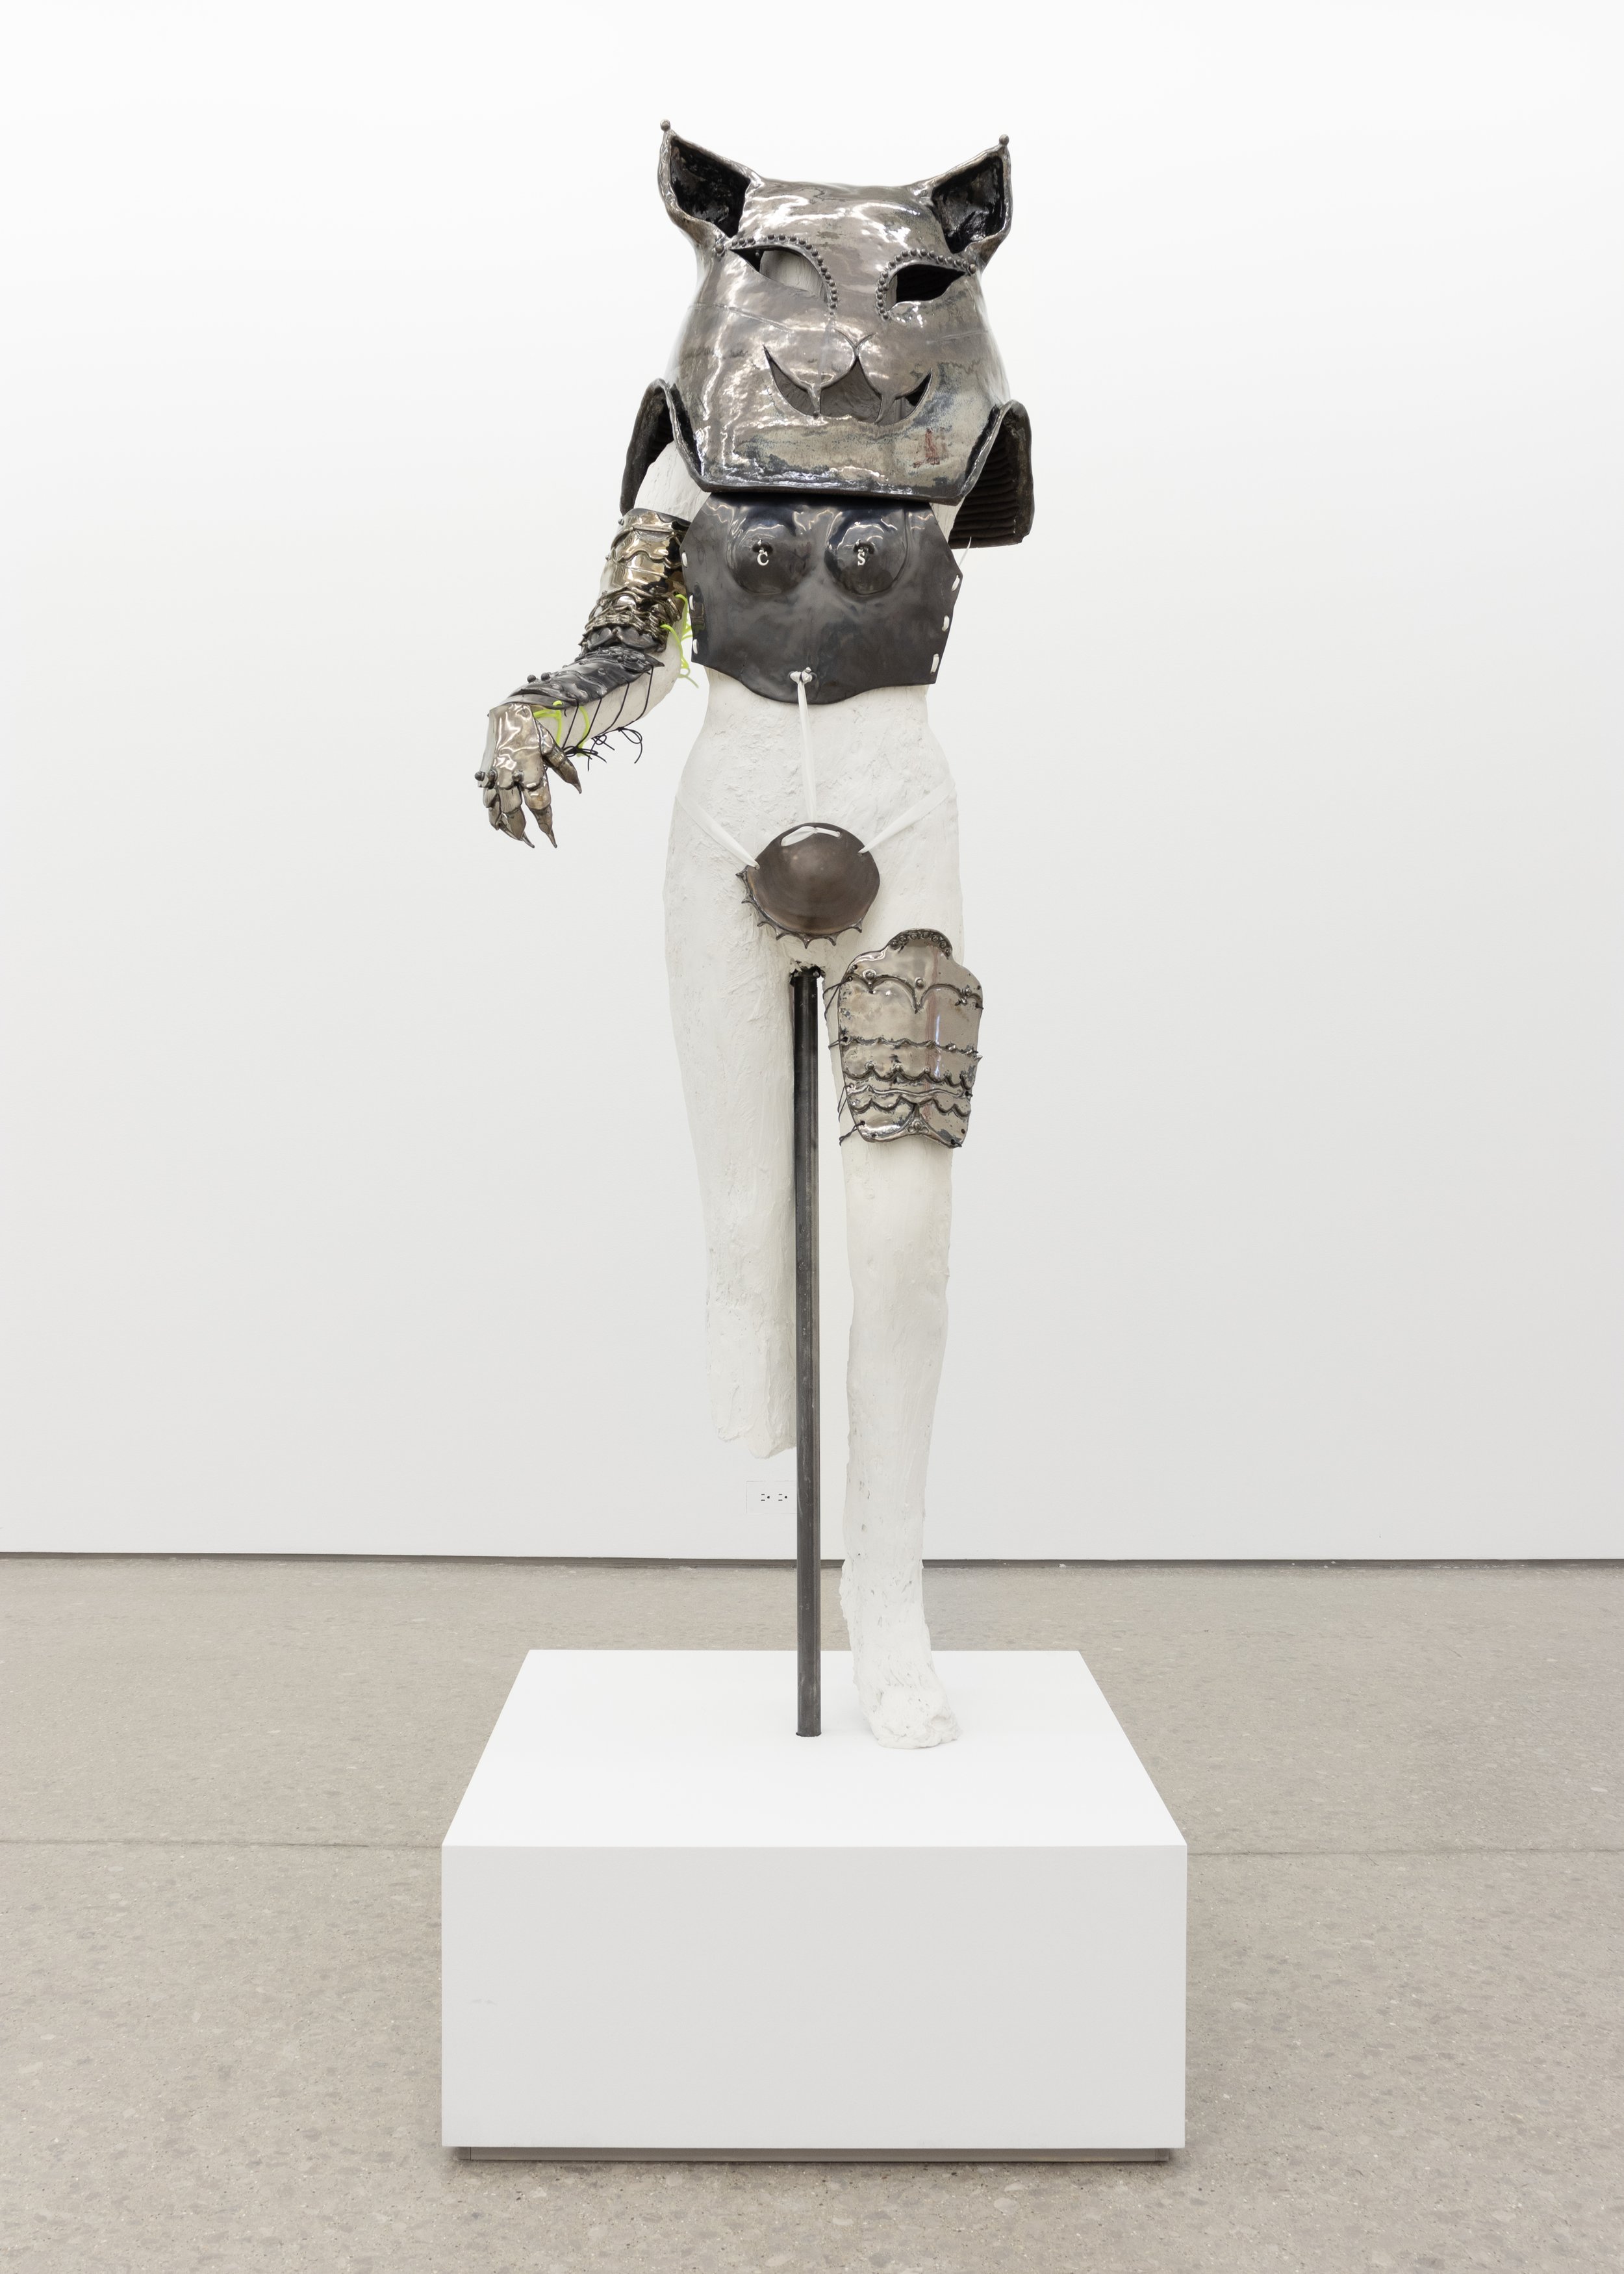  Chloe Seibert  Catsuit 2, 2023  glazed stoneware, plaster, wire, satin ribbon, rubber cord, stainless steel jewelry  84h x 26w x 24d in 